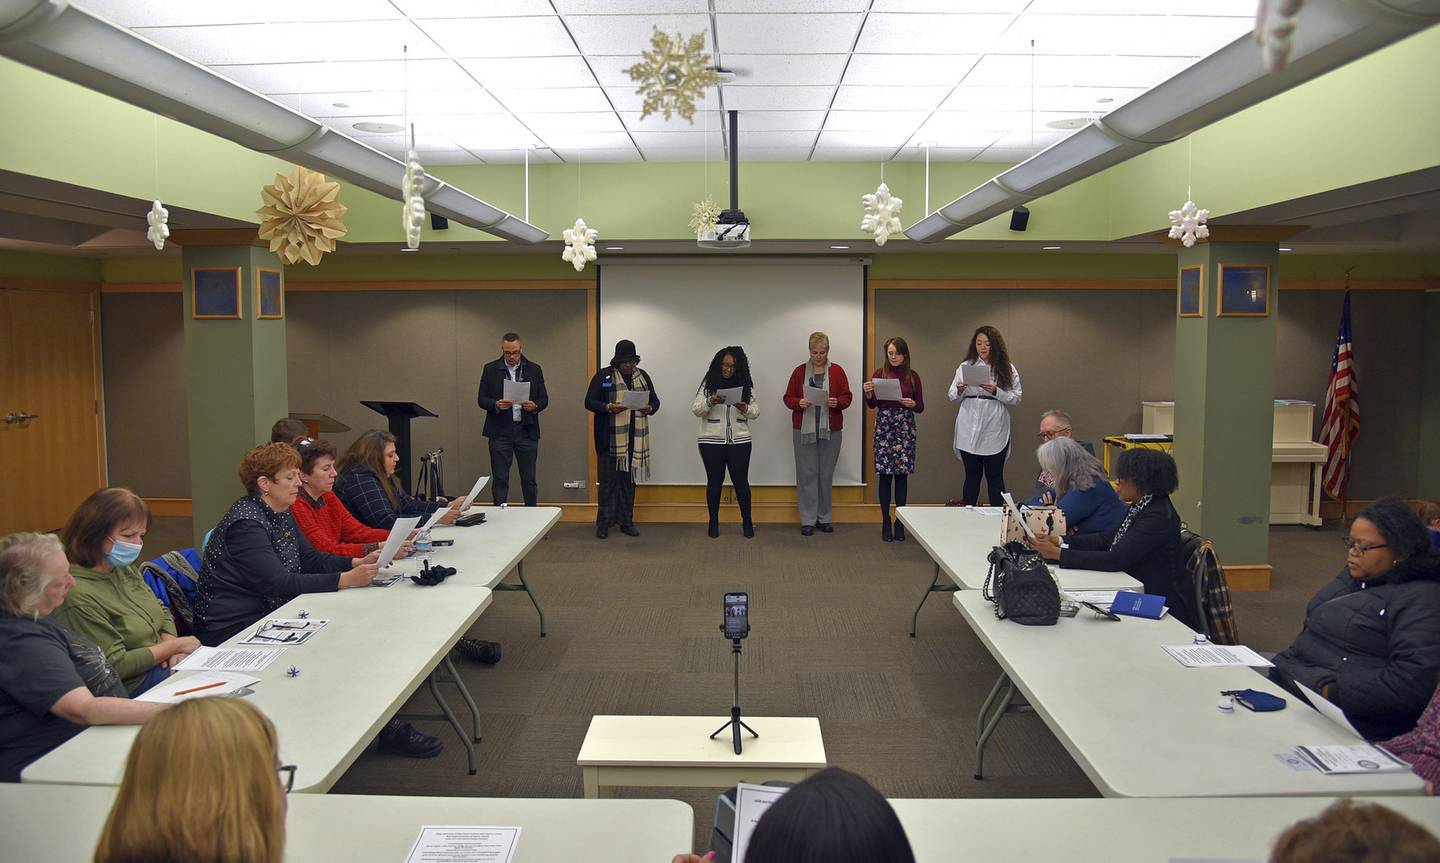 The collective statement is being read at the front of the room at the Human Trafficking Awareness Candle Vigil on Jan. 30, 2023 at the Waukegan Public Library in the Ray Bradbury Room.